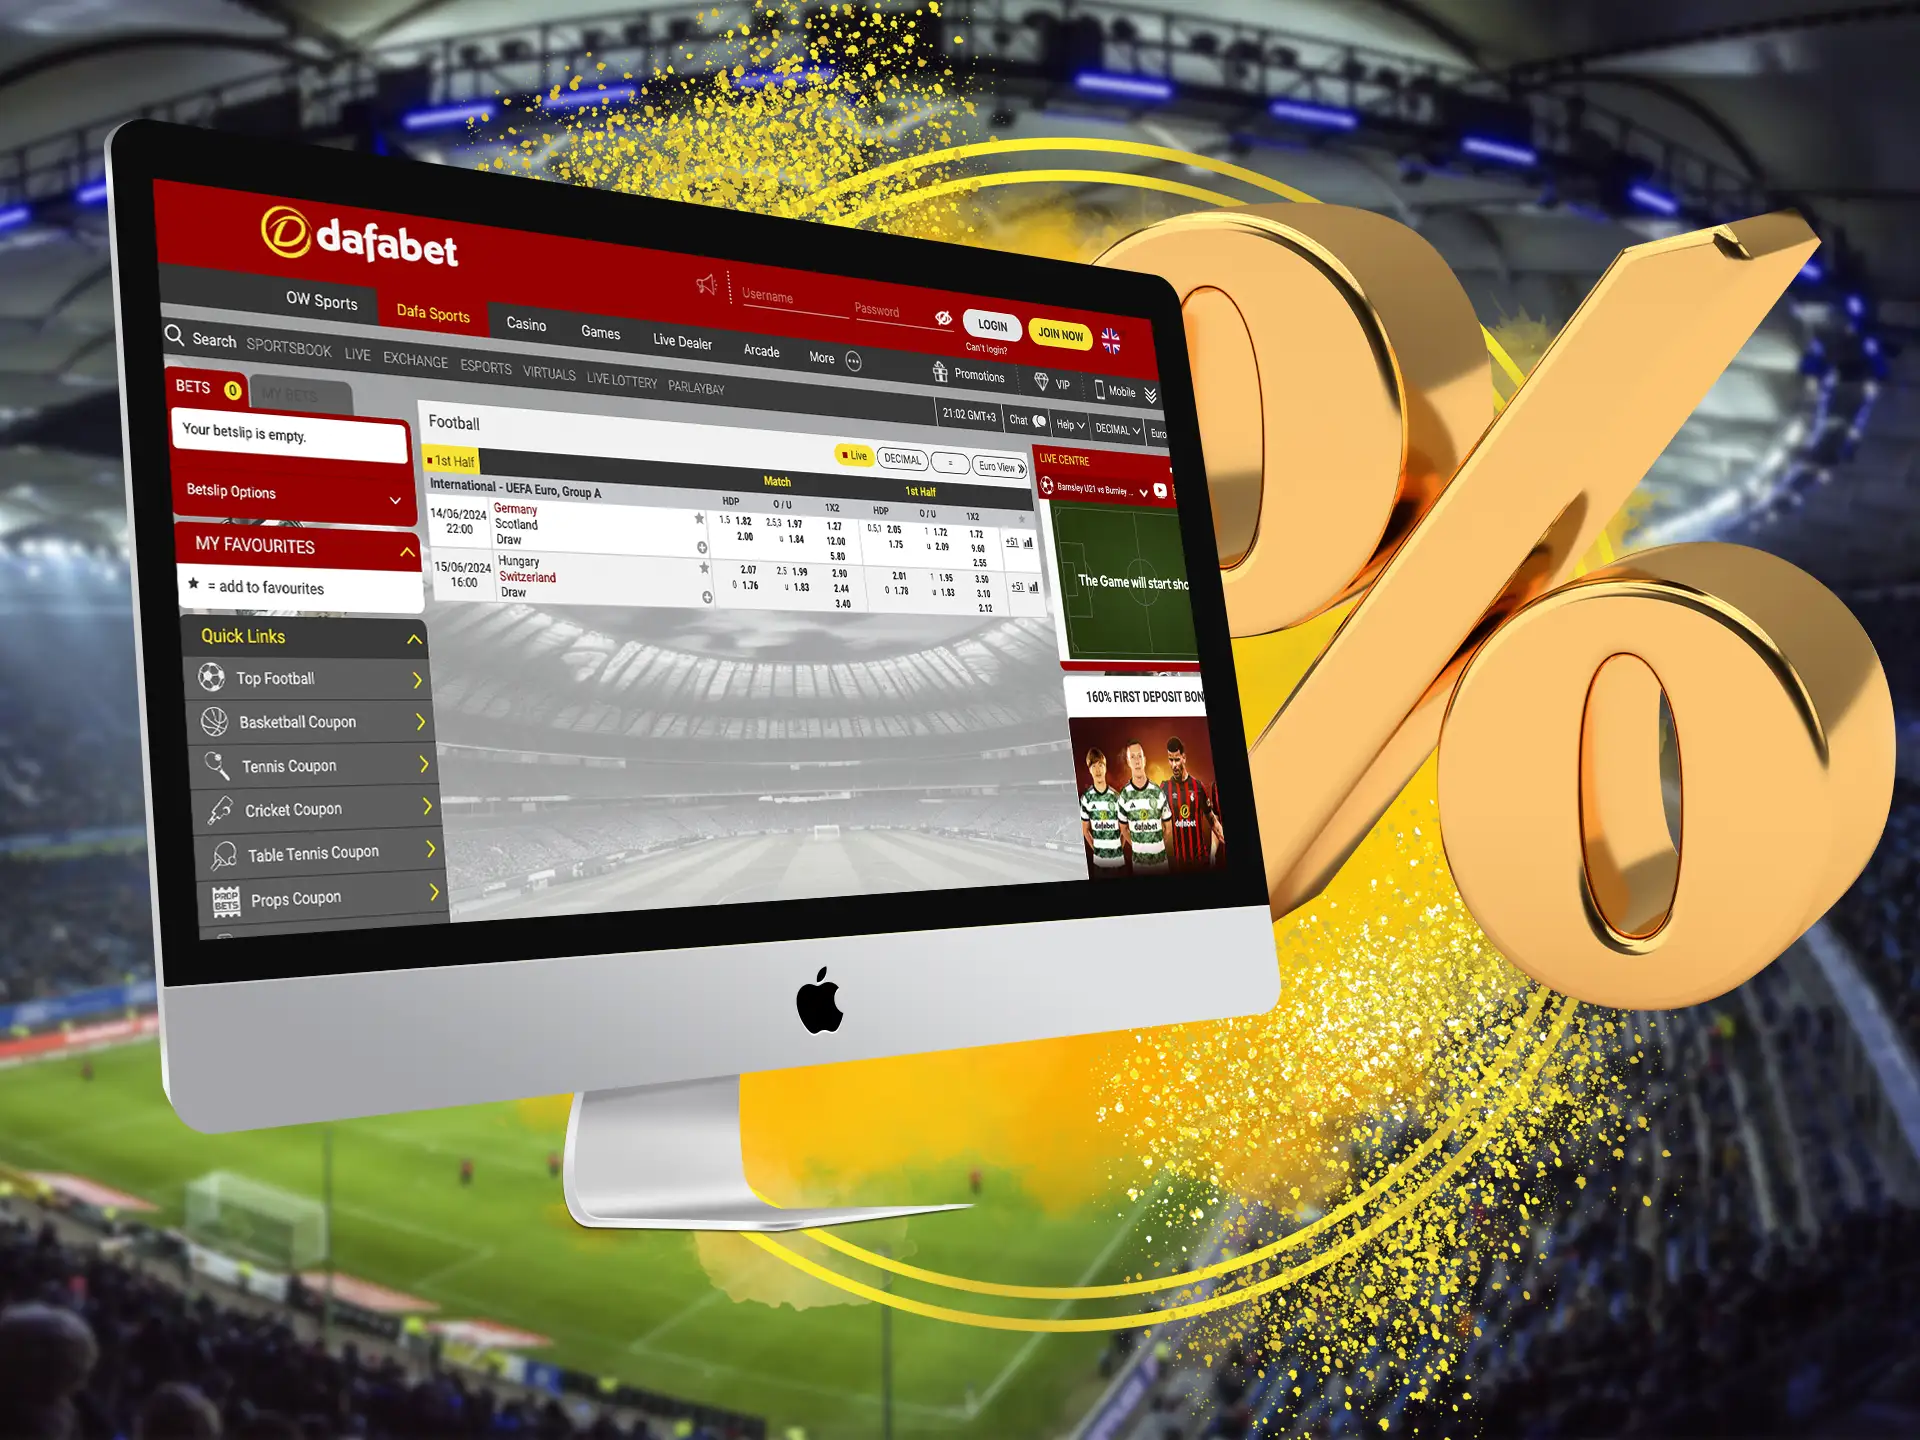 To increase your chances of winning in online football bet, your choice should be focused on betting sites that offer high odds.